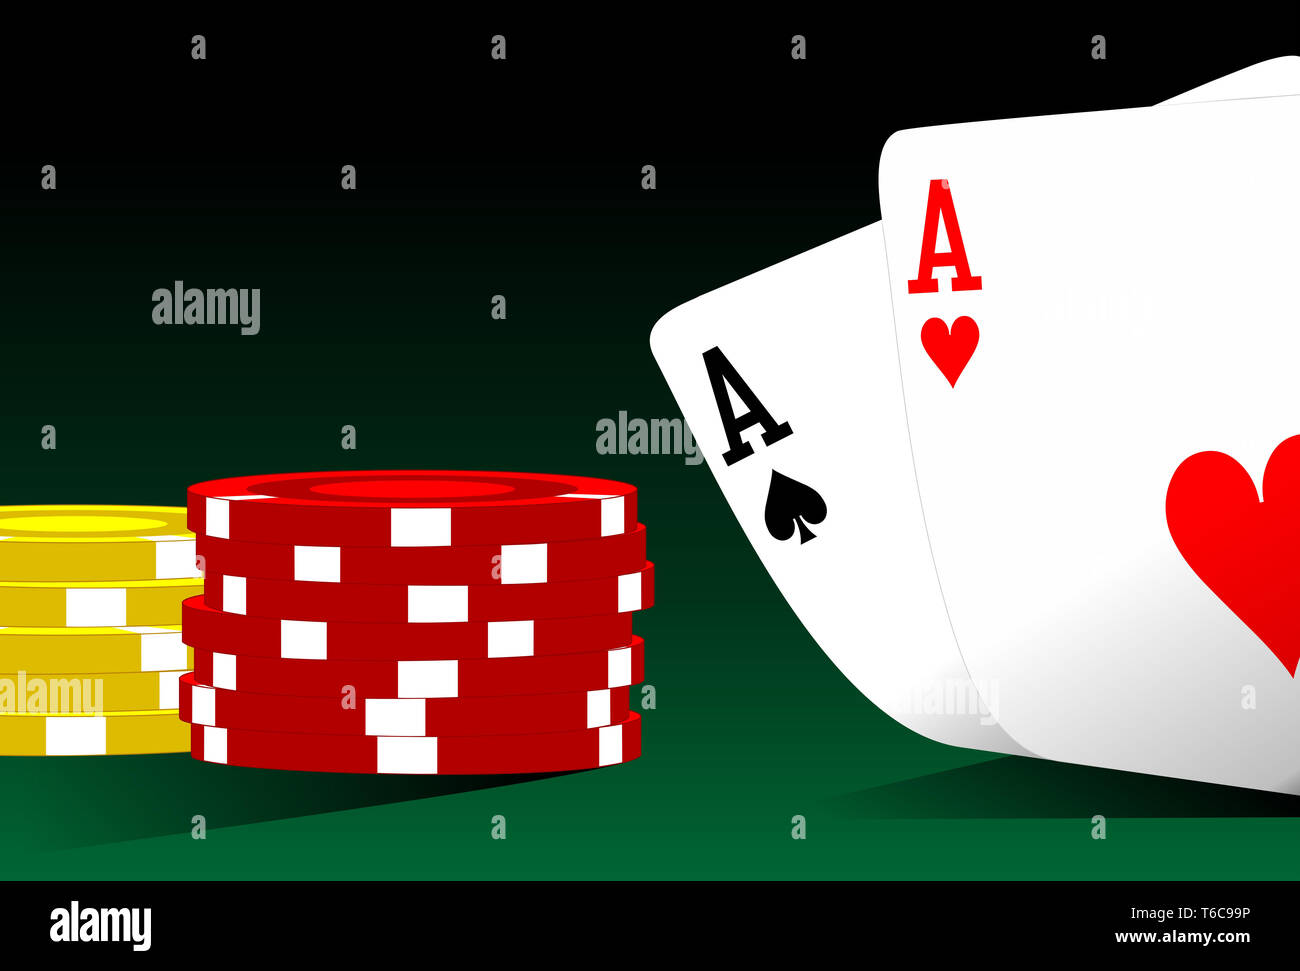 Illustration of pocket aces on a poker table Stock Photo